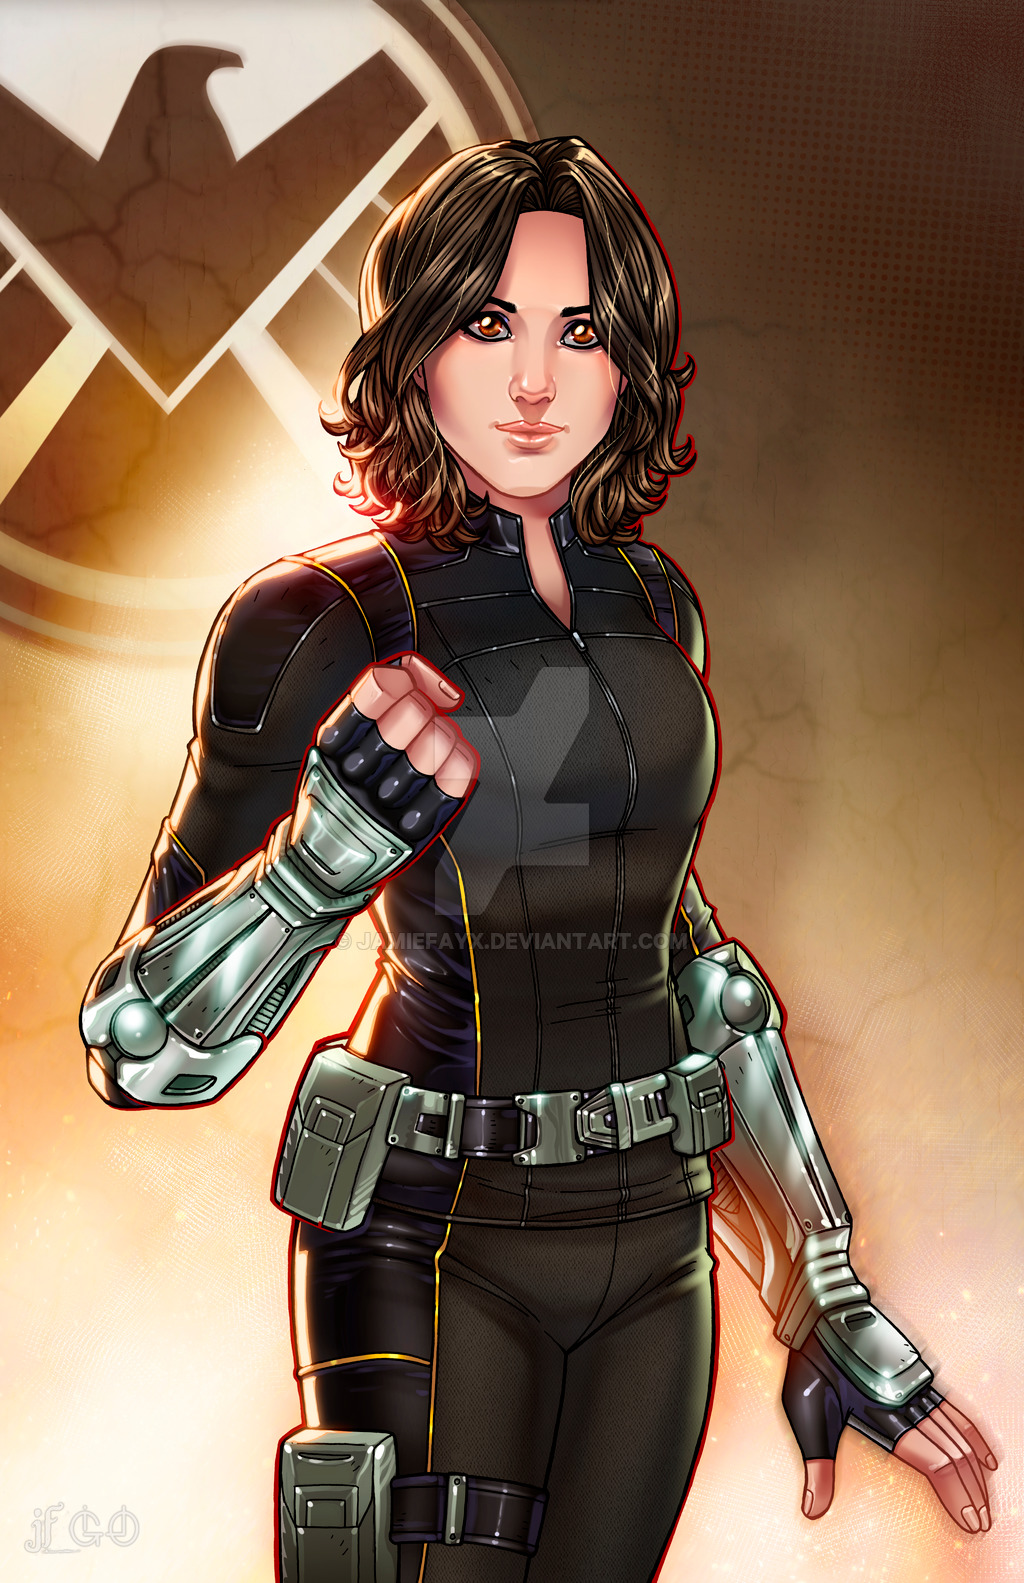 Quake   Agent of SHIELD by JamieFayX on